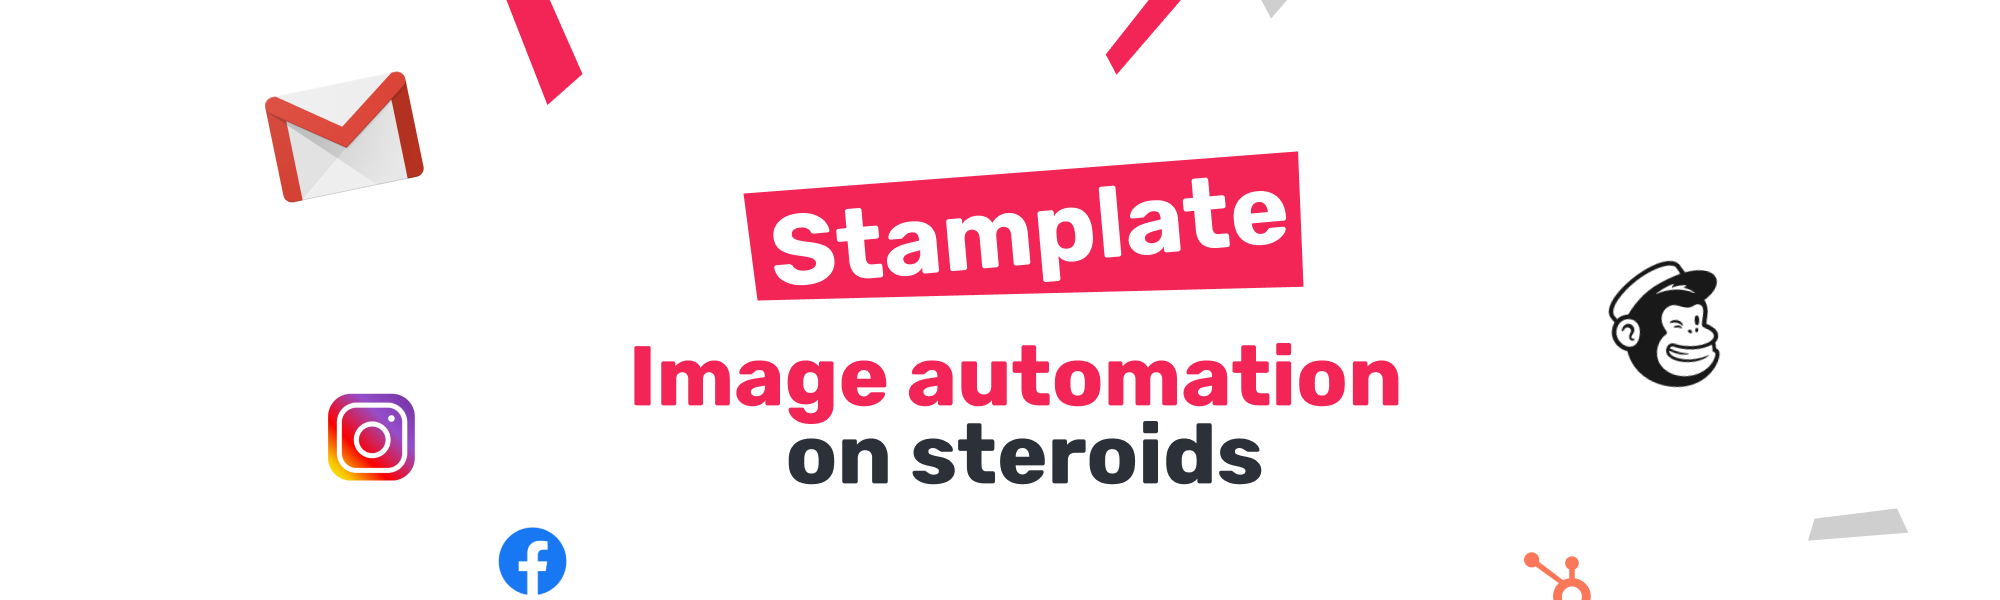 Review Stamplate: Automate the generation of custom images - Appvizer